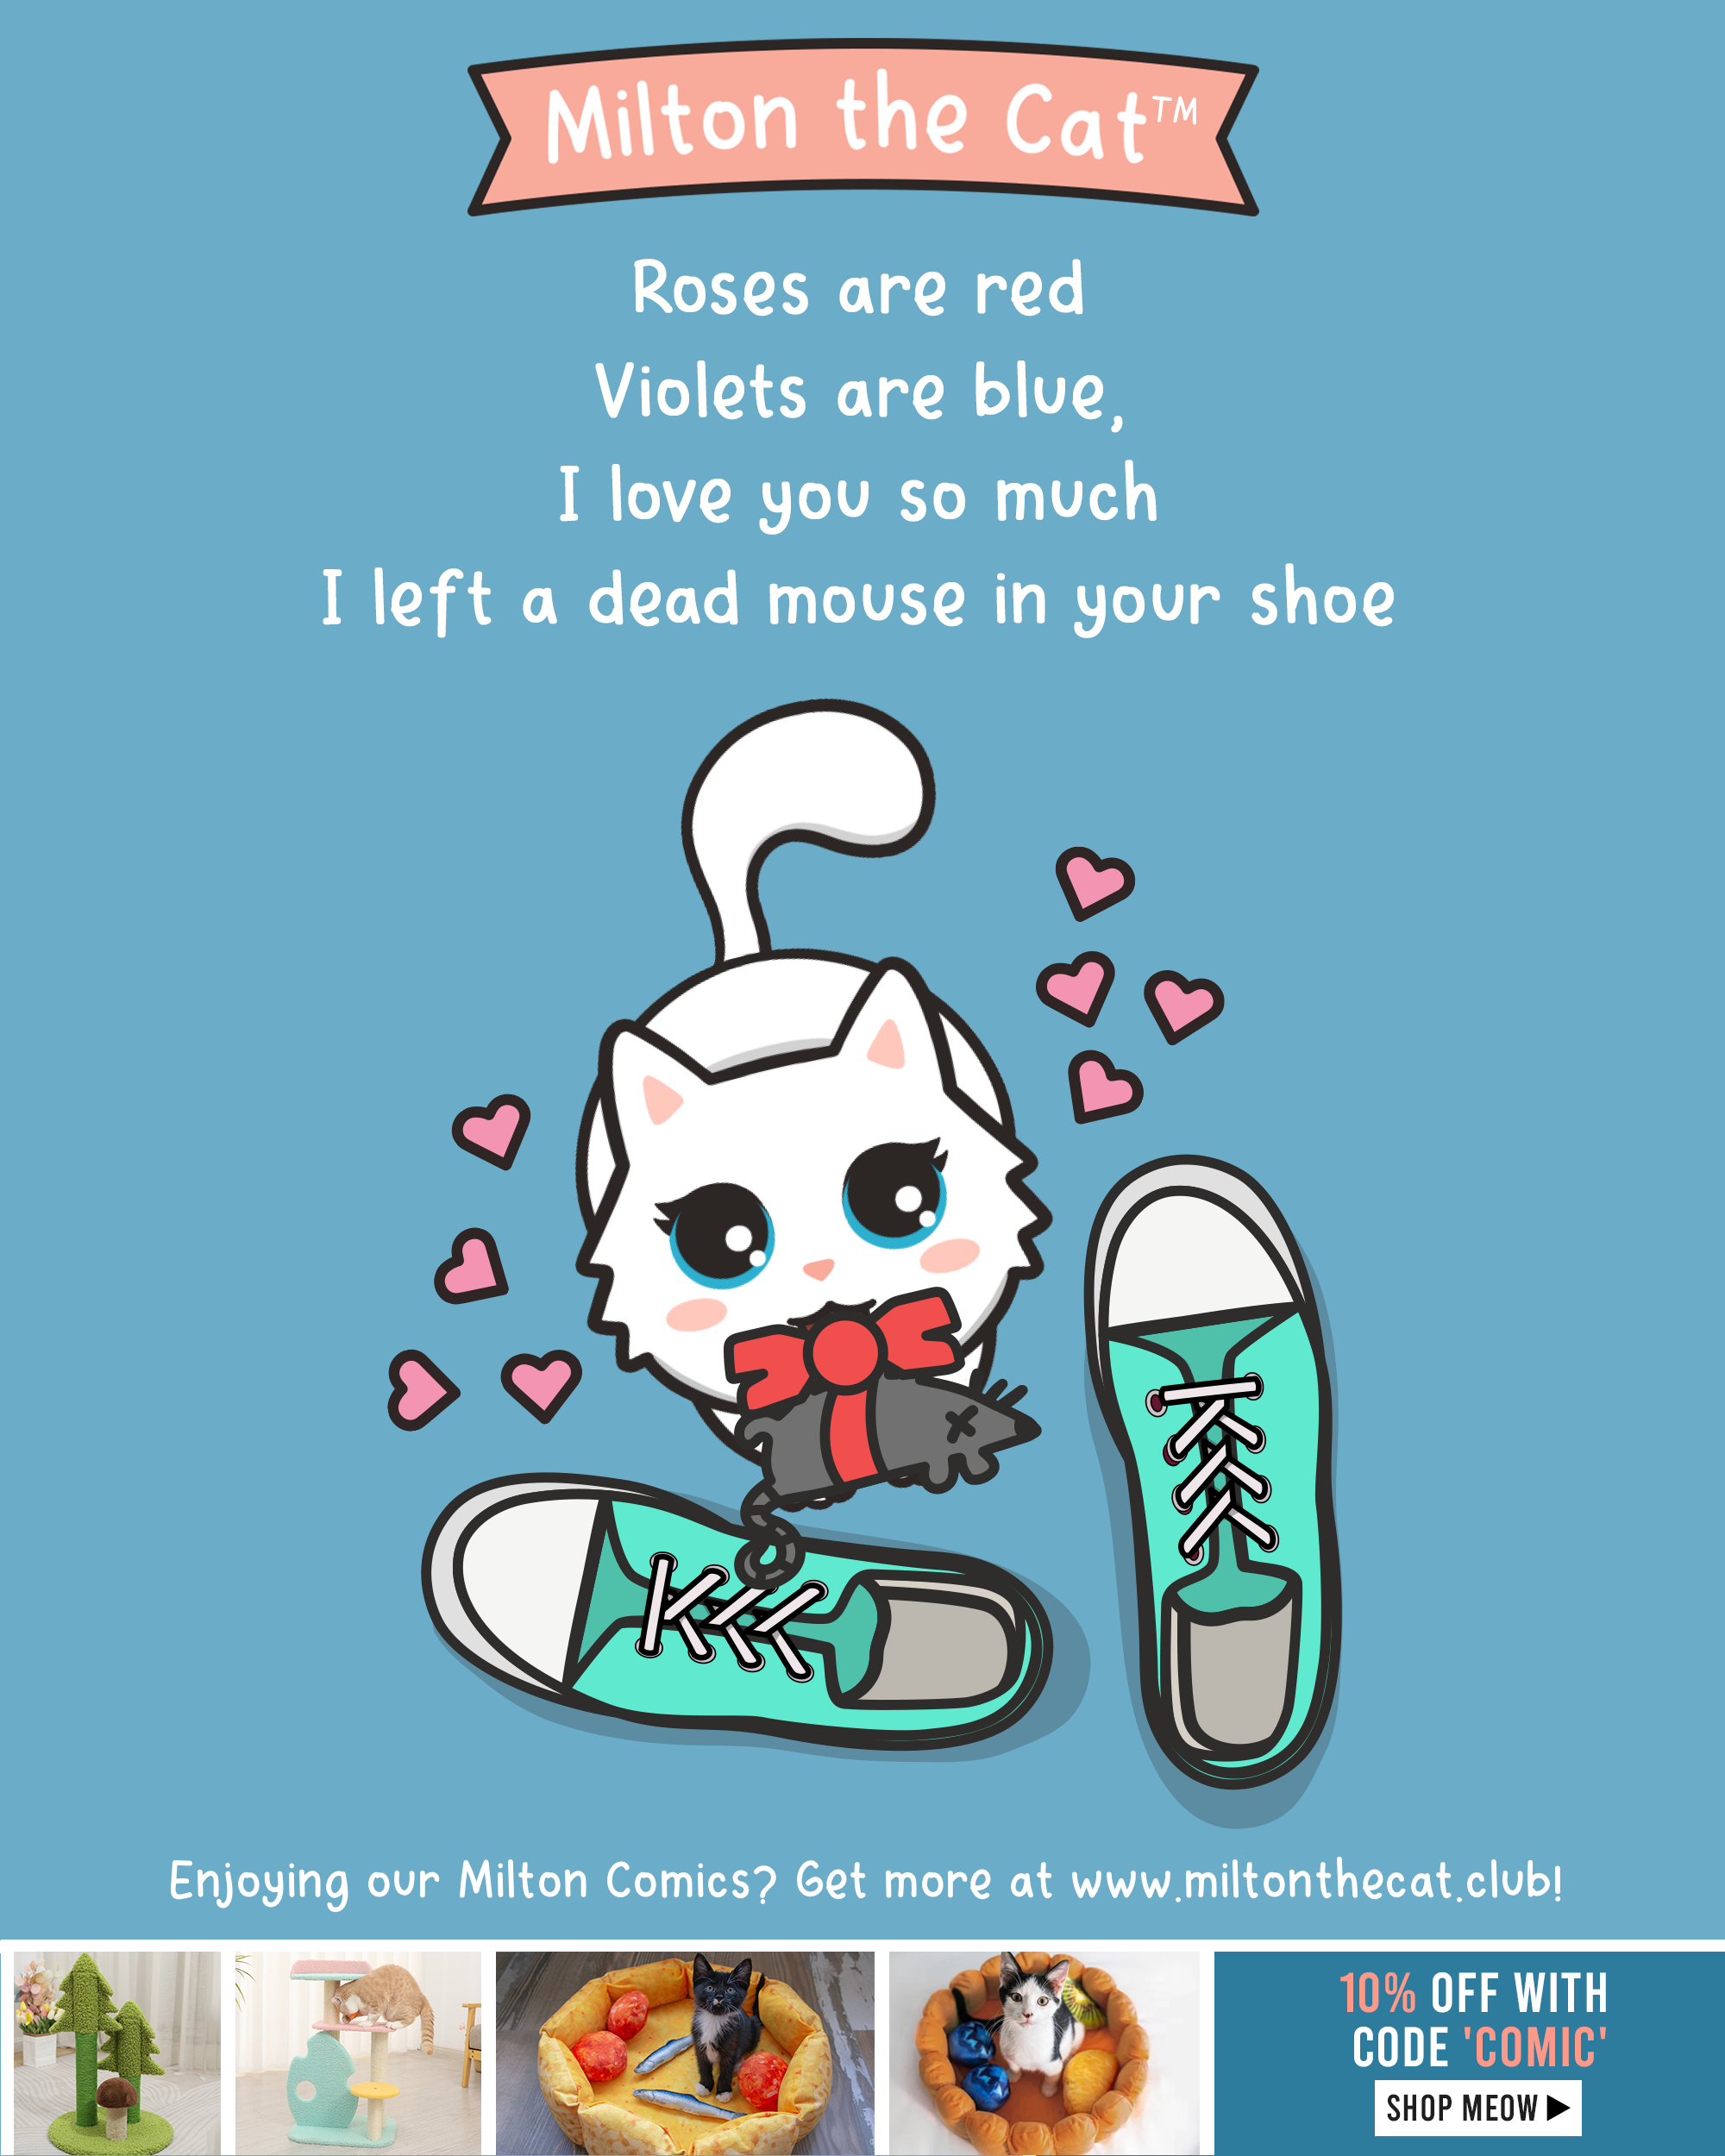 Text: Roses are red, violets are blue, I love you so much I left a dead mouse in your shoe. An illustration of a white, long-haired kitten putting a dead mouse in a pair of teal converse sneakers; the mouse is wrapped in a bow.